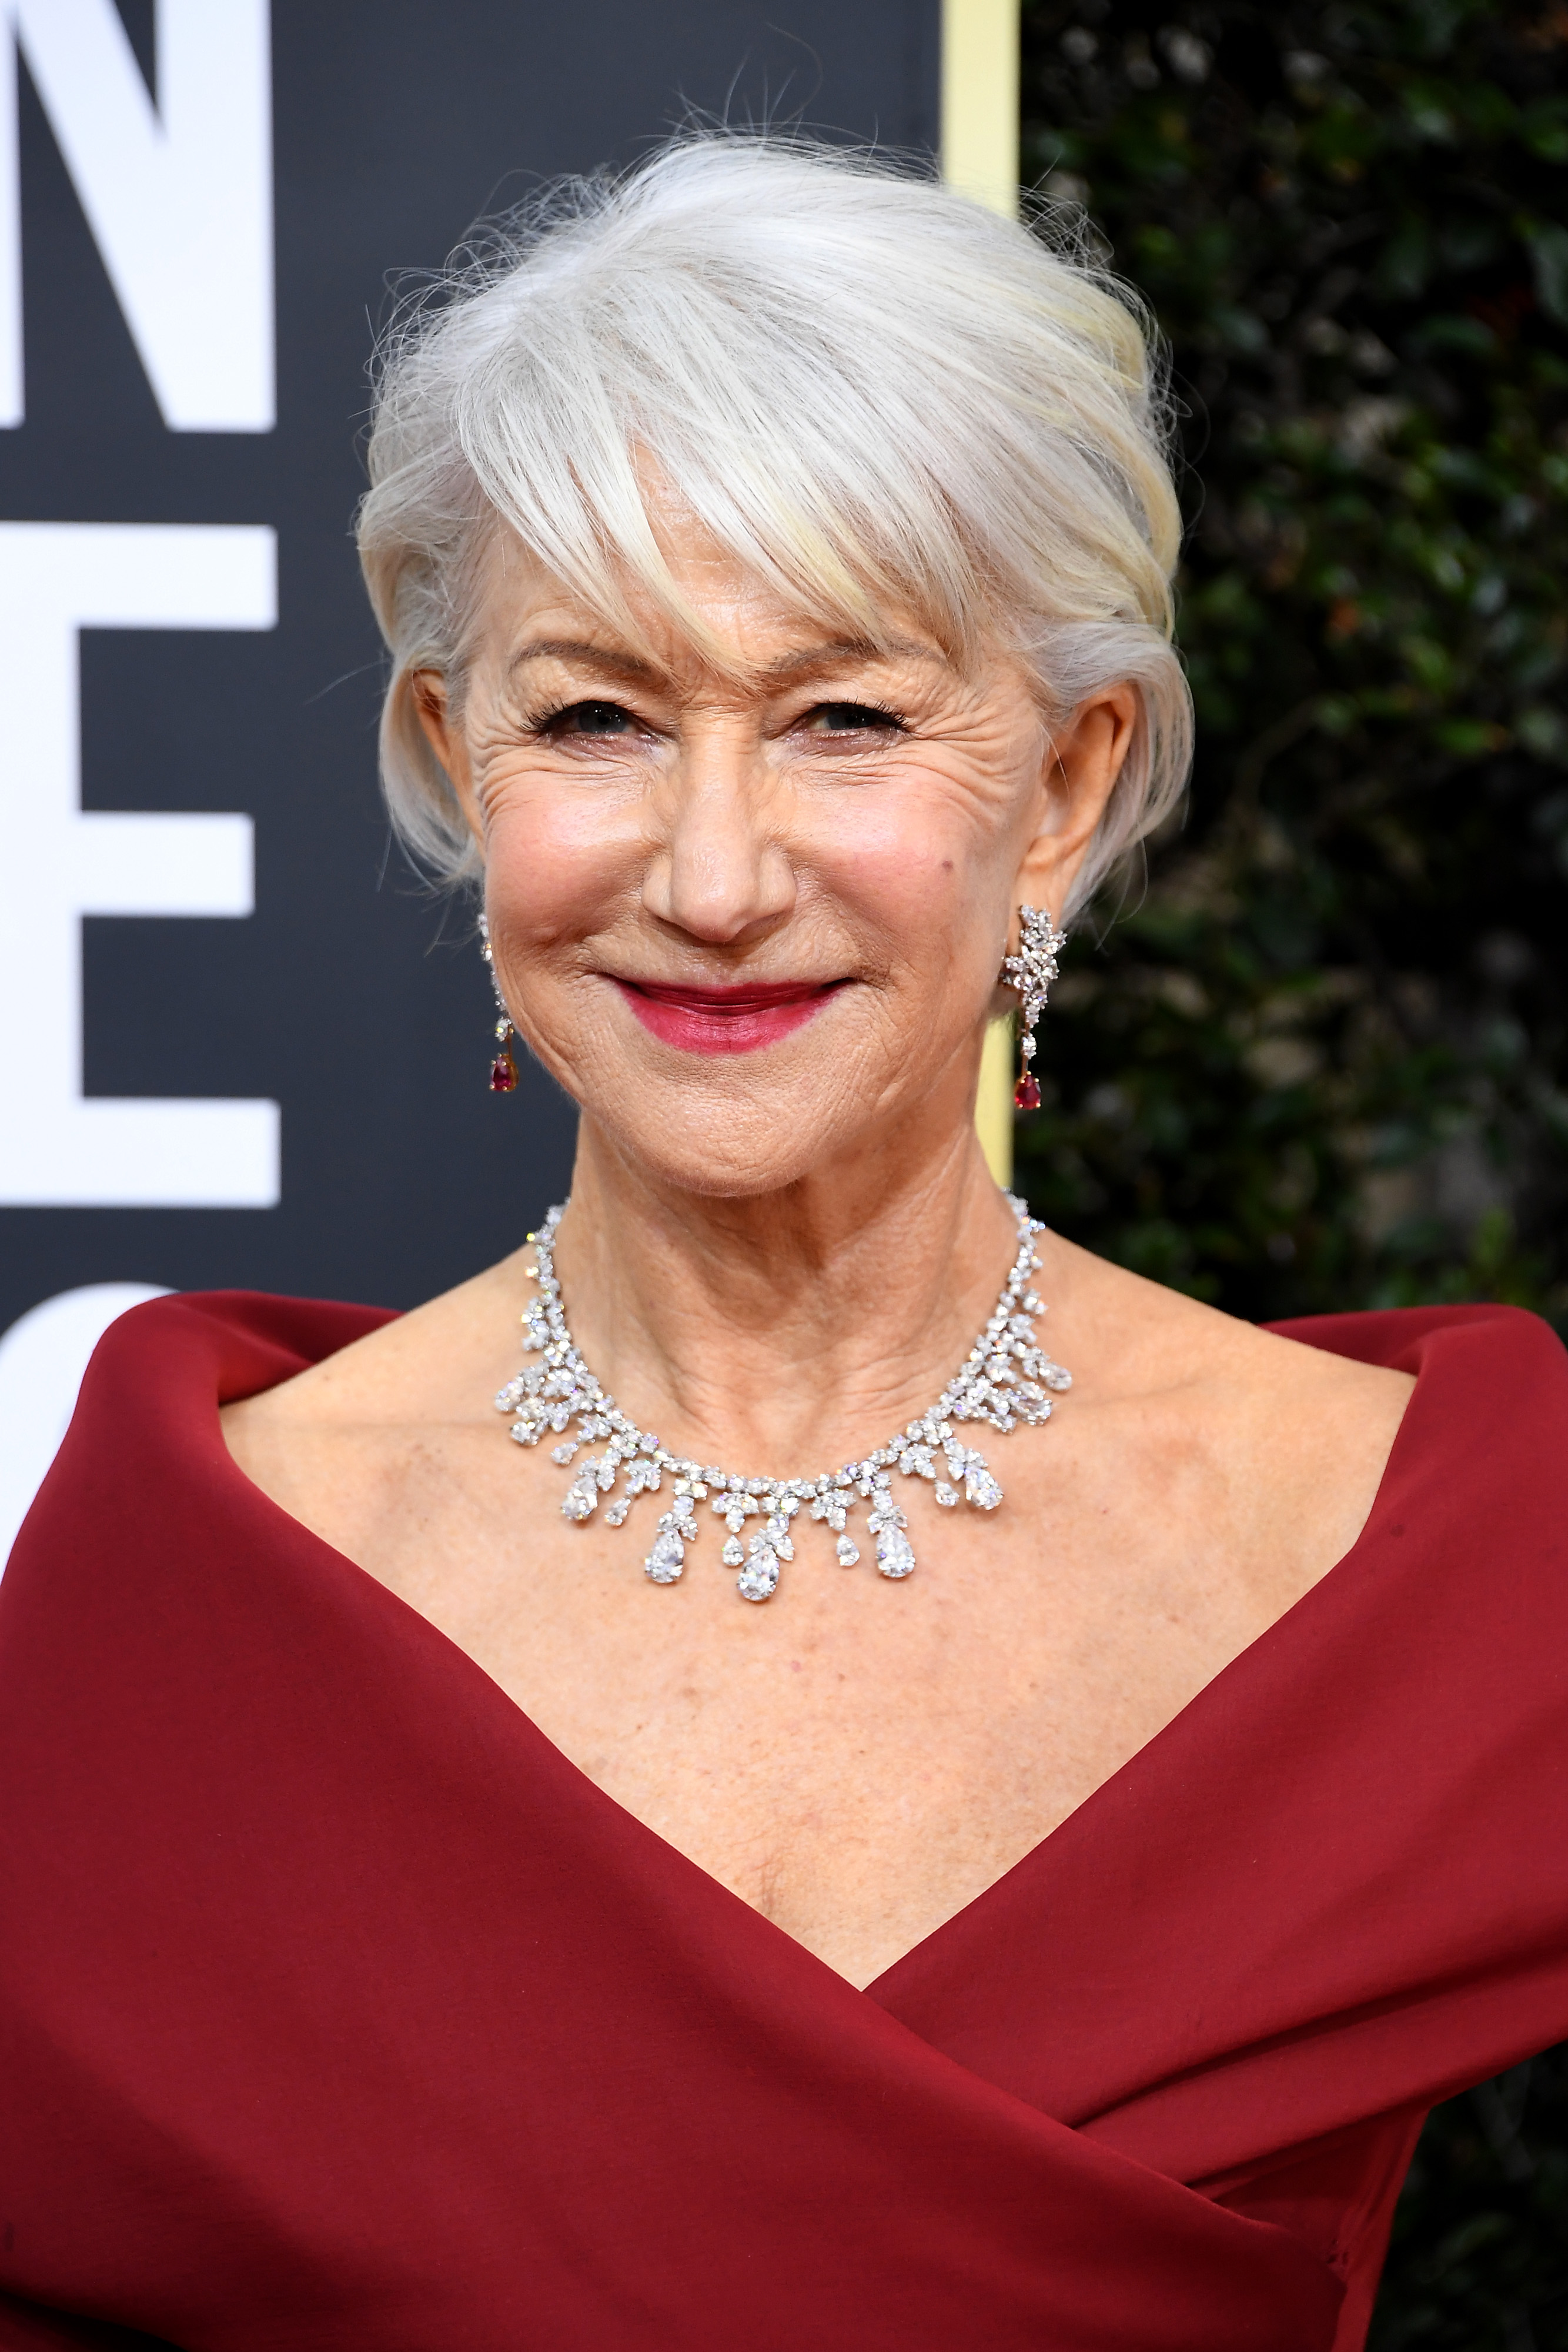 Helen Mirren during the 77th Annual Golden Globe Awards at The Beverly Hilton Hotel on January 5, 2020, in Beverly Hills, California. | Source: Getty Images